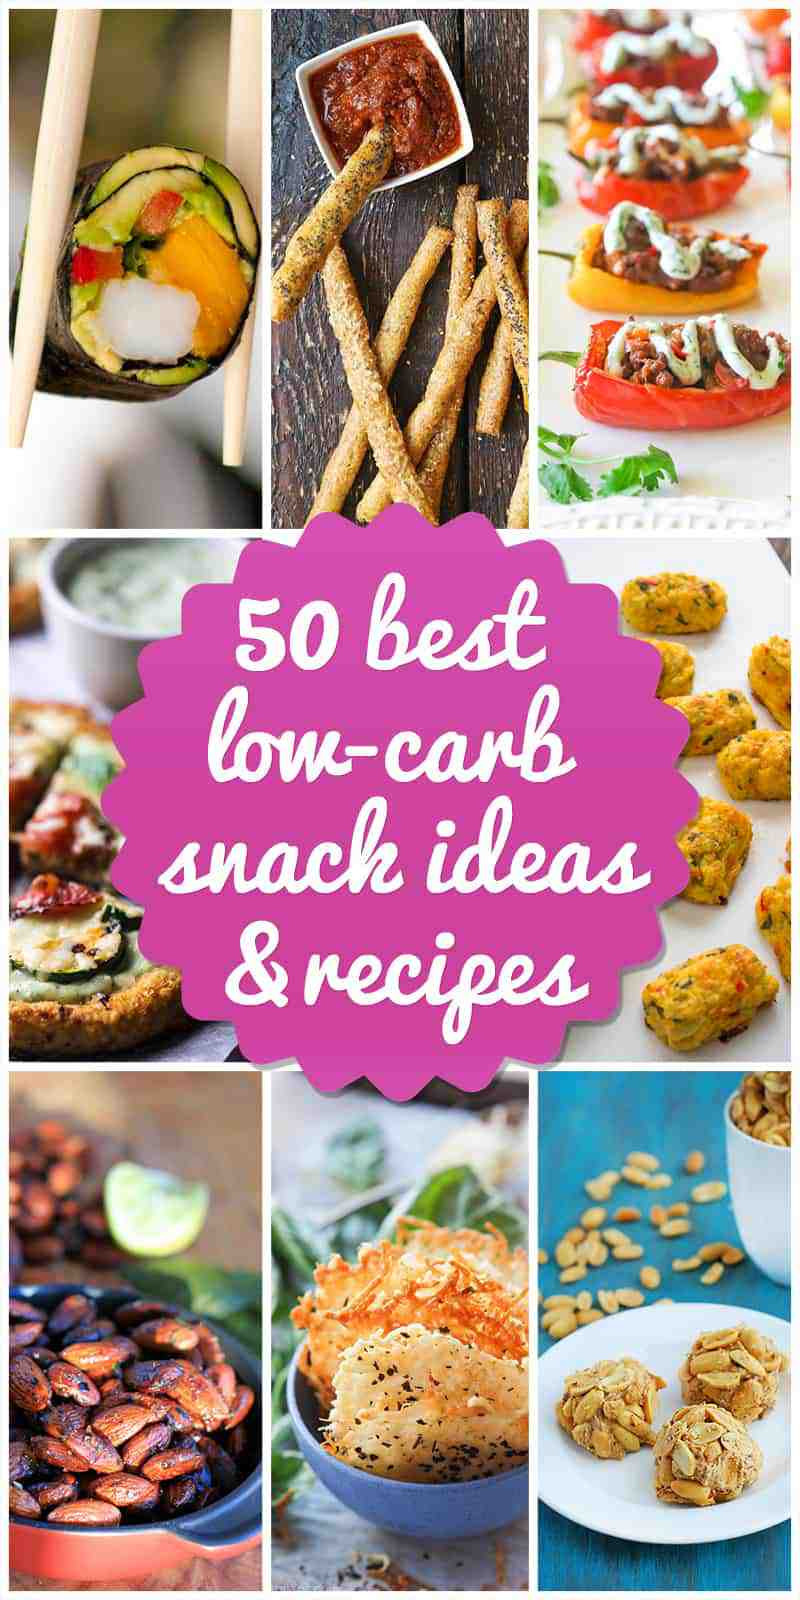 Low Carb Snack Recipes
 50 Low Carb Snack Ideas and Recipes for 2018